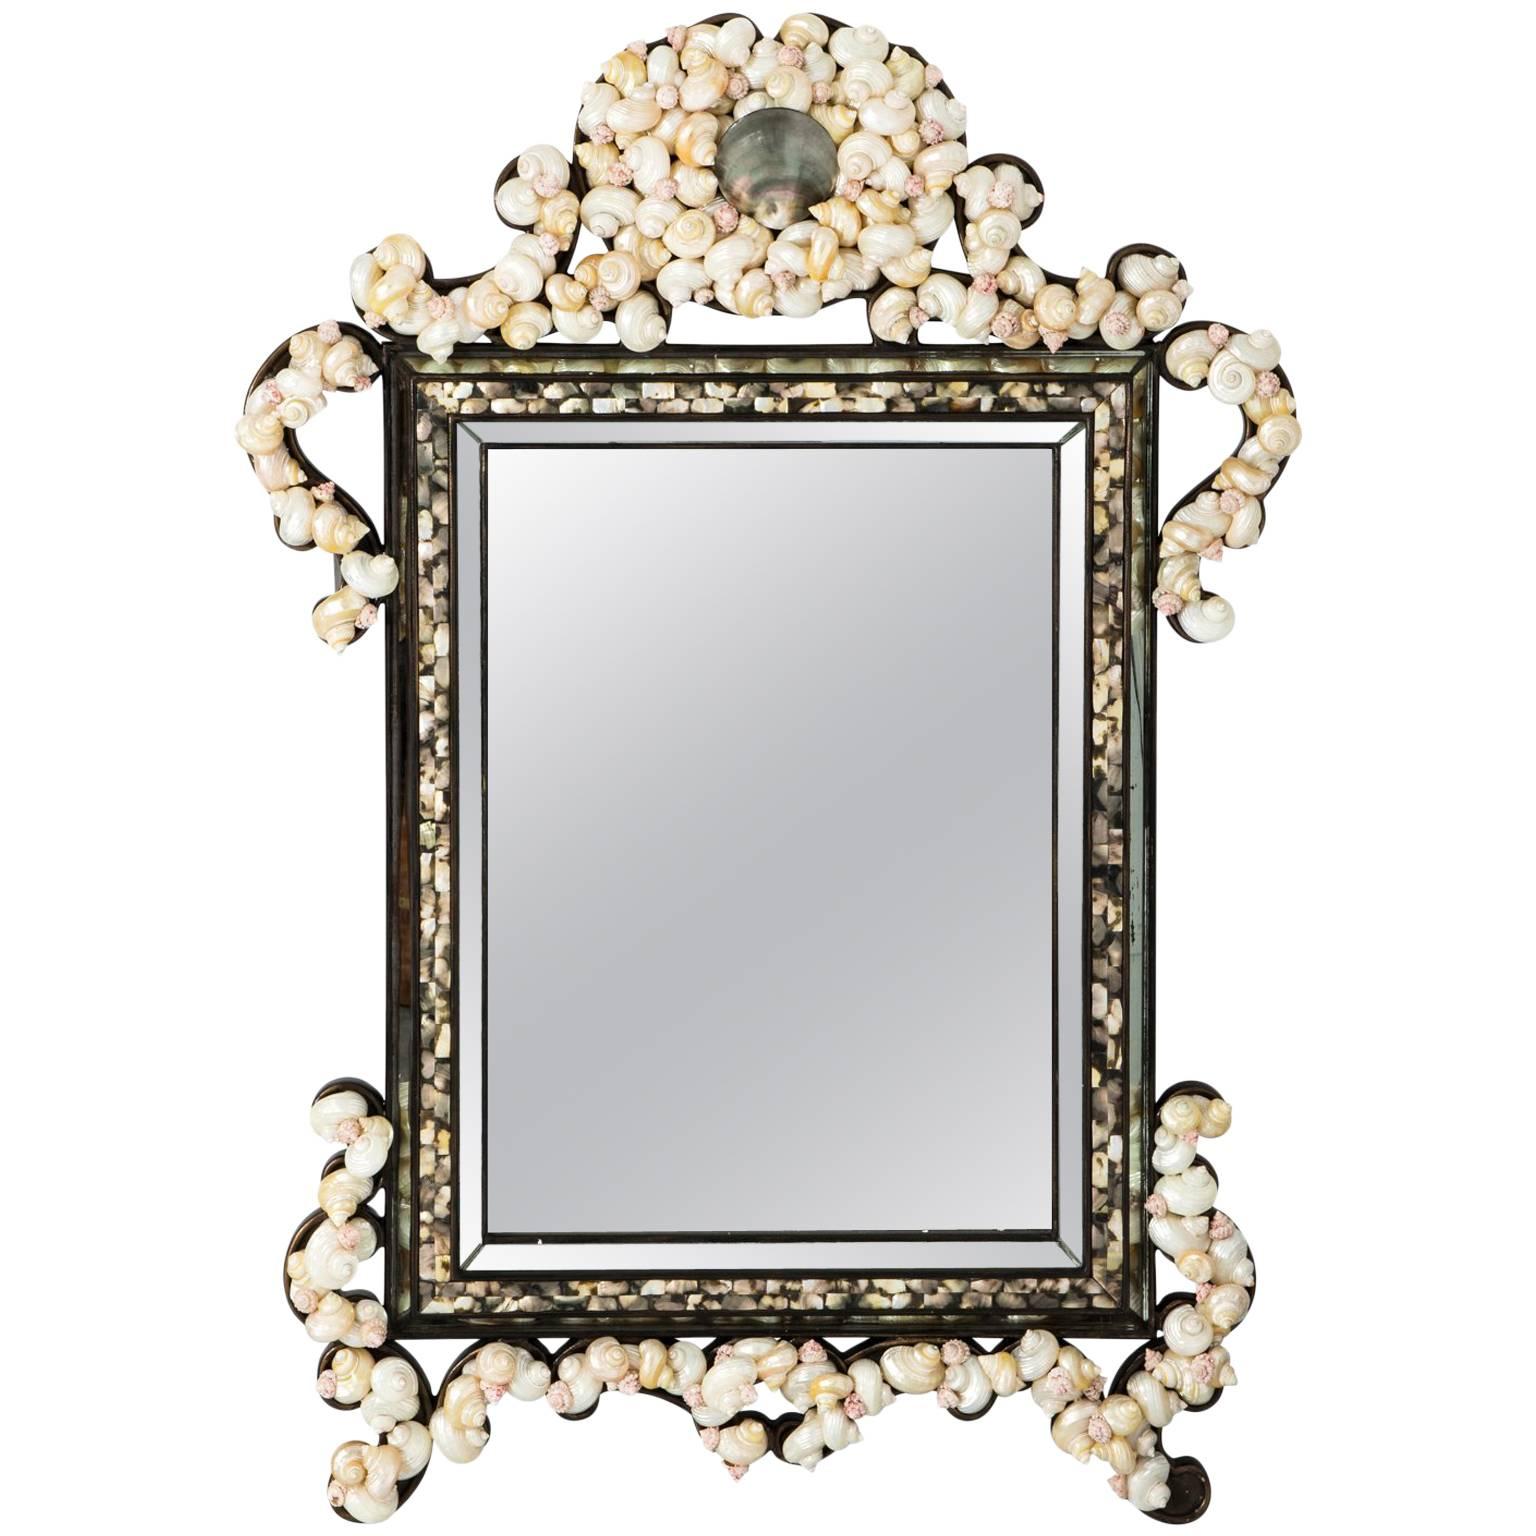 Shell Encrusted Mirror by La Barge